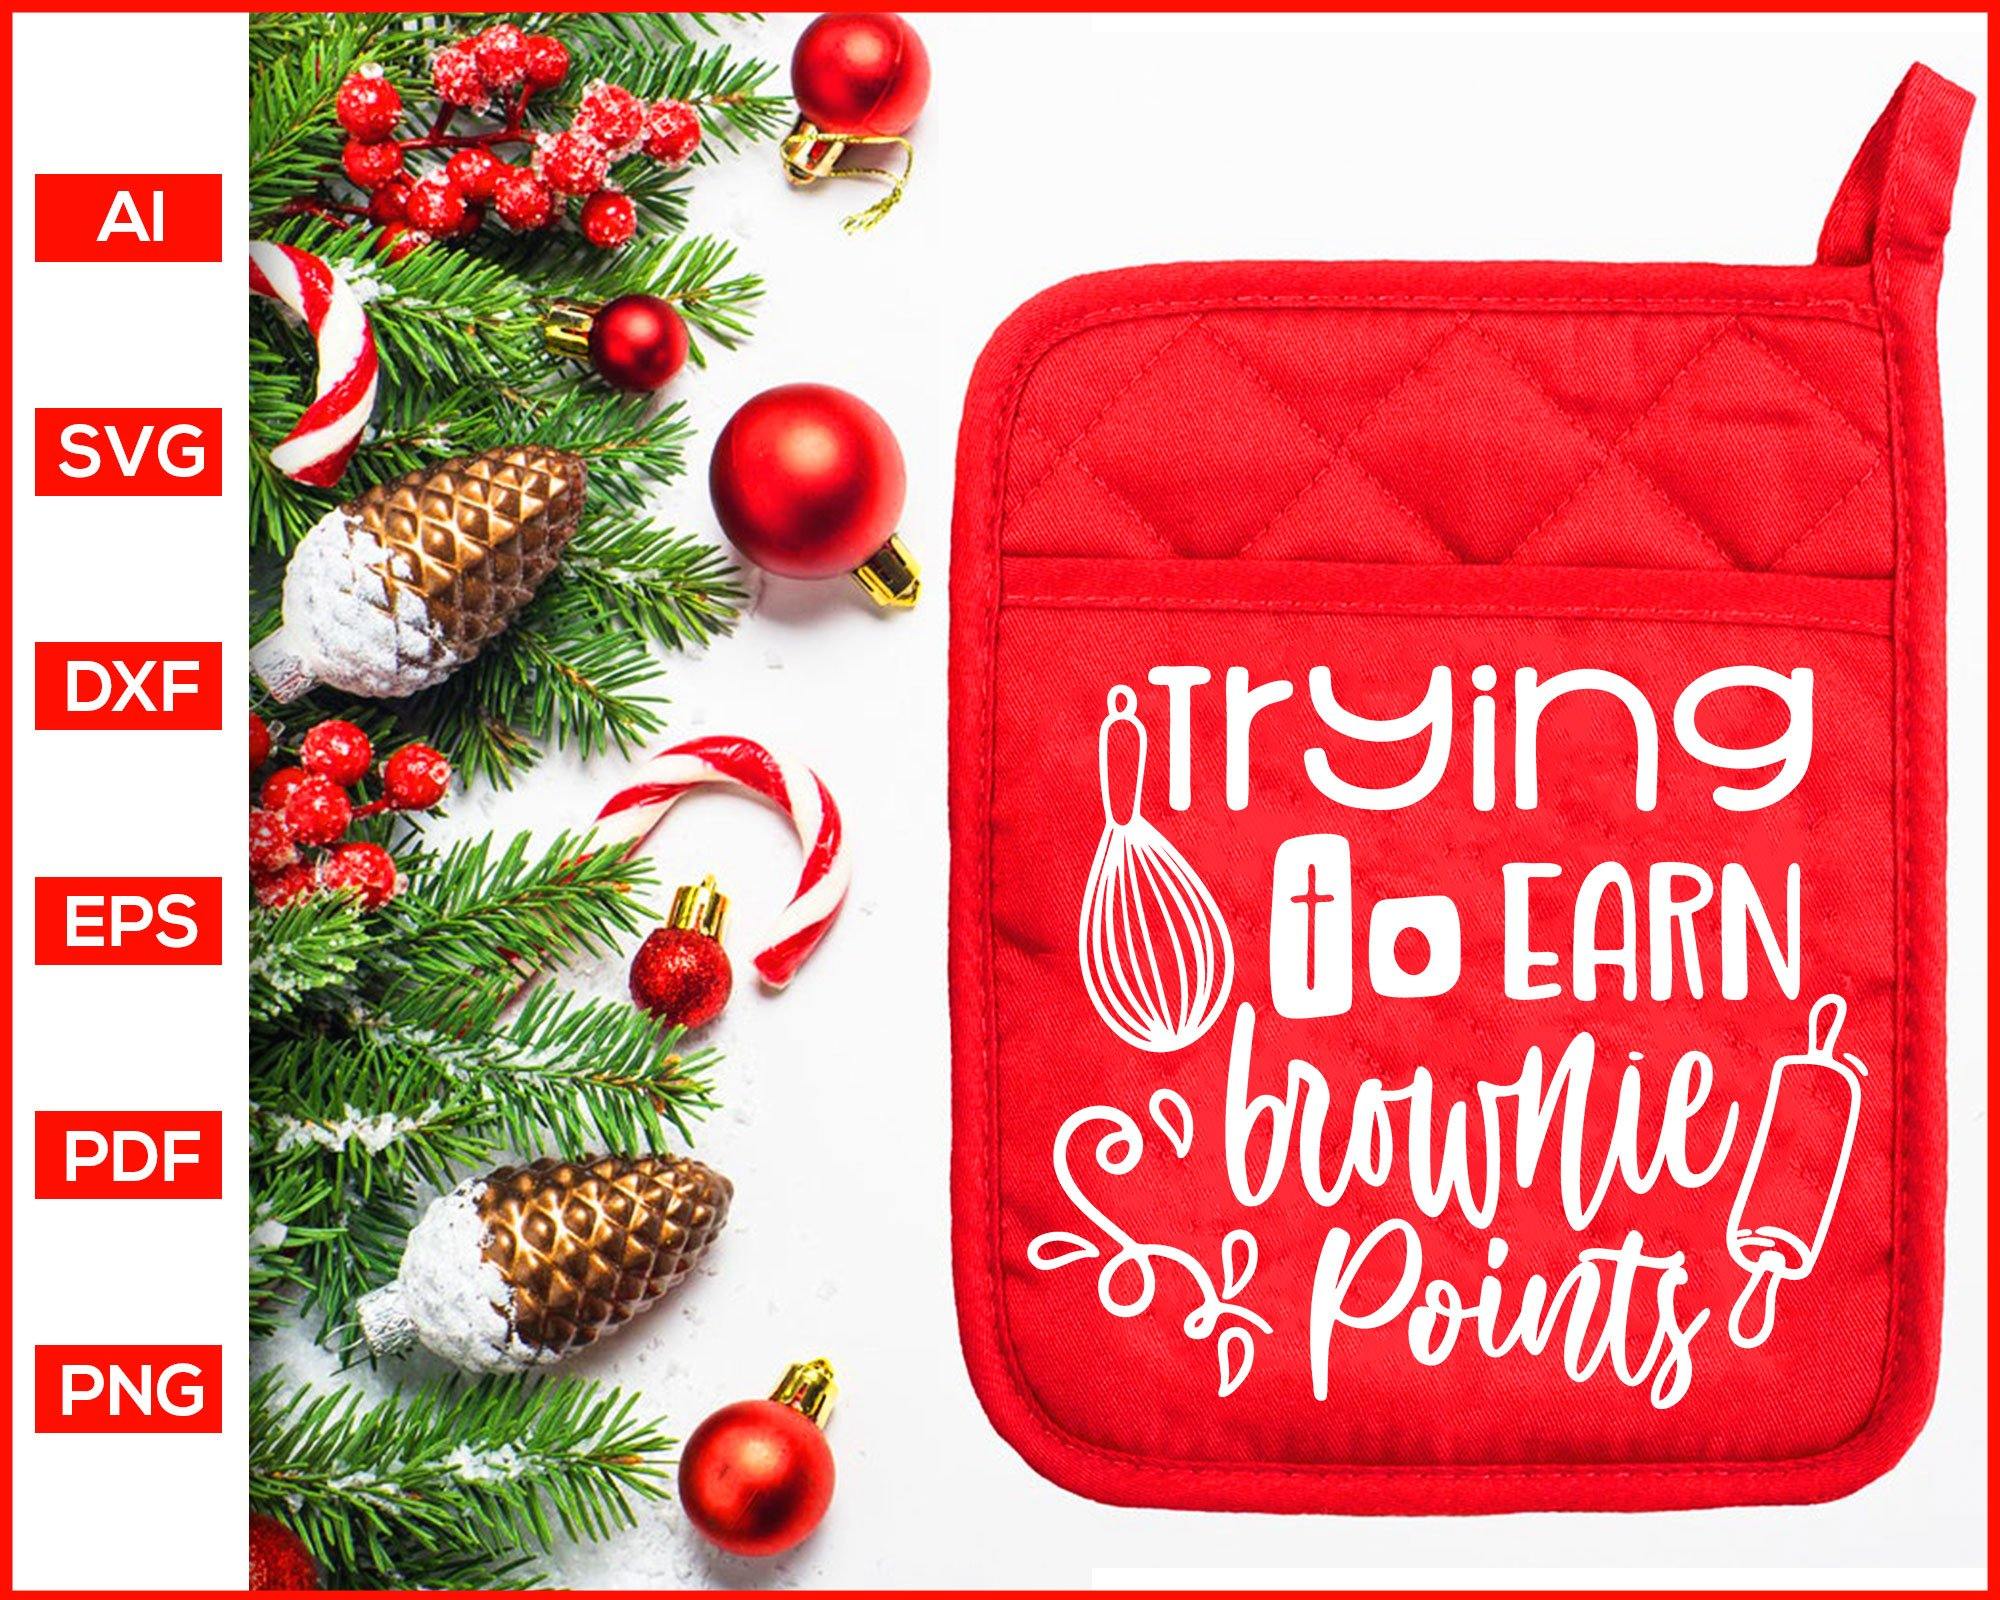 Download Trying To Earn Brownie Points Svg Christmas Pot Holder Svg Pot Holde Editable Svg File